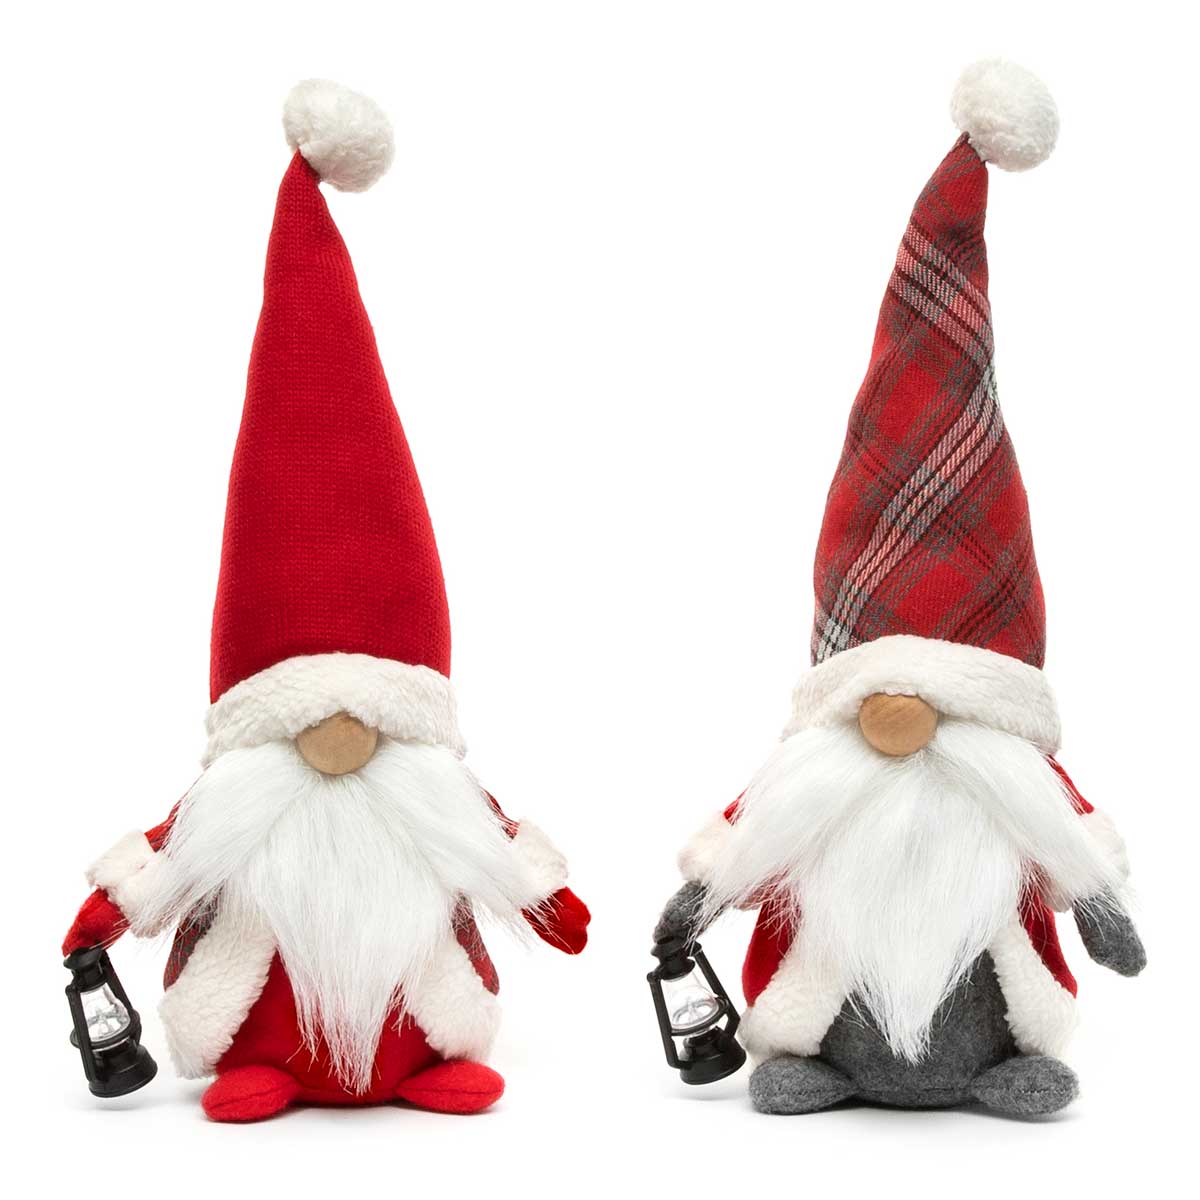 SEASON GREETINGS GNOME RED WITH LANTERN 2 AST 15"